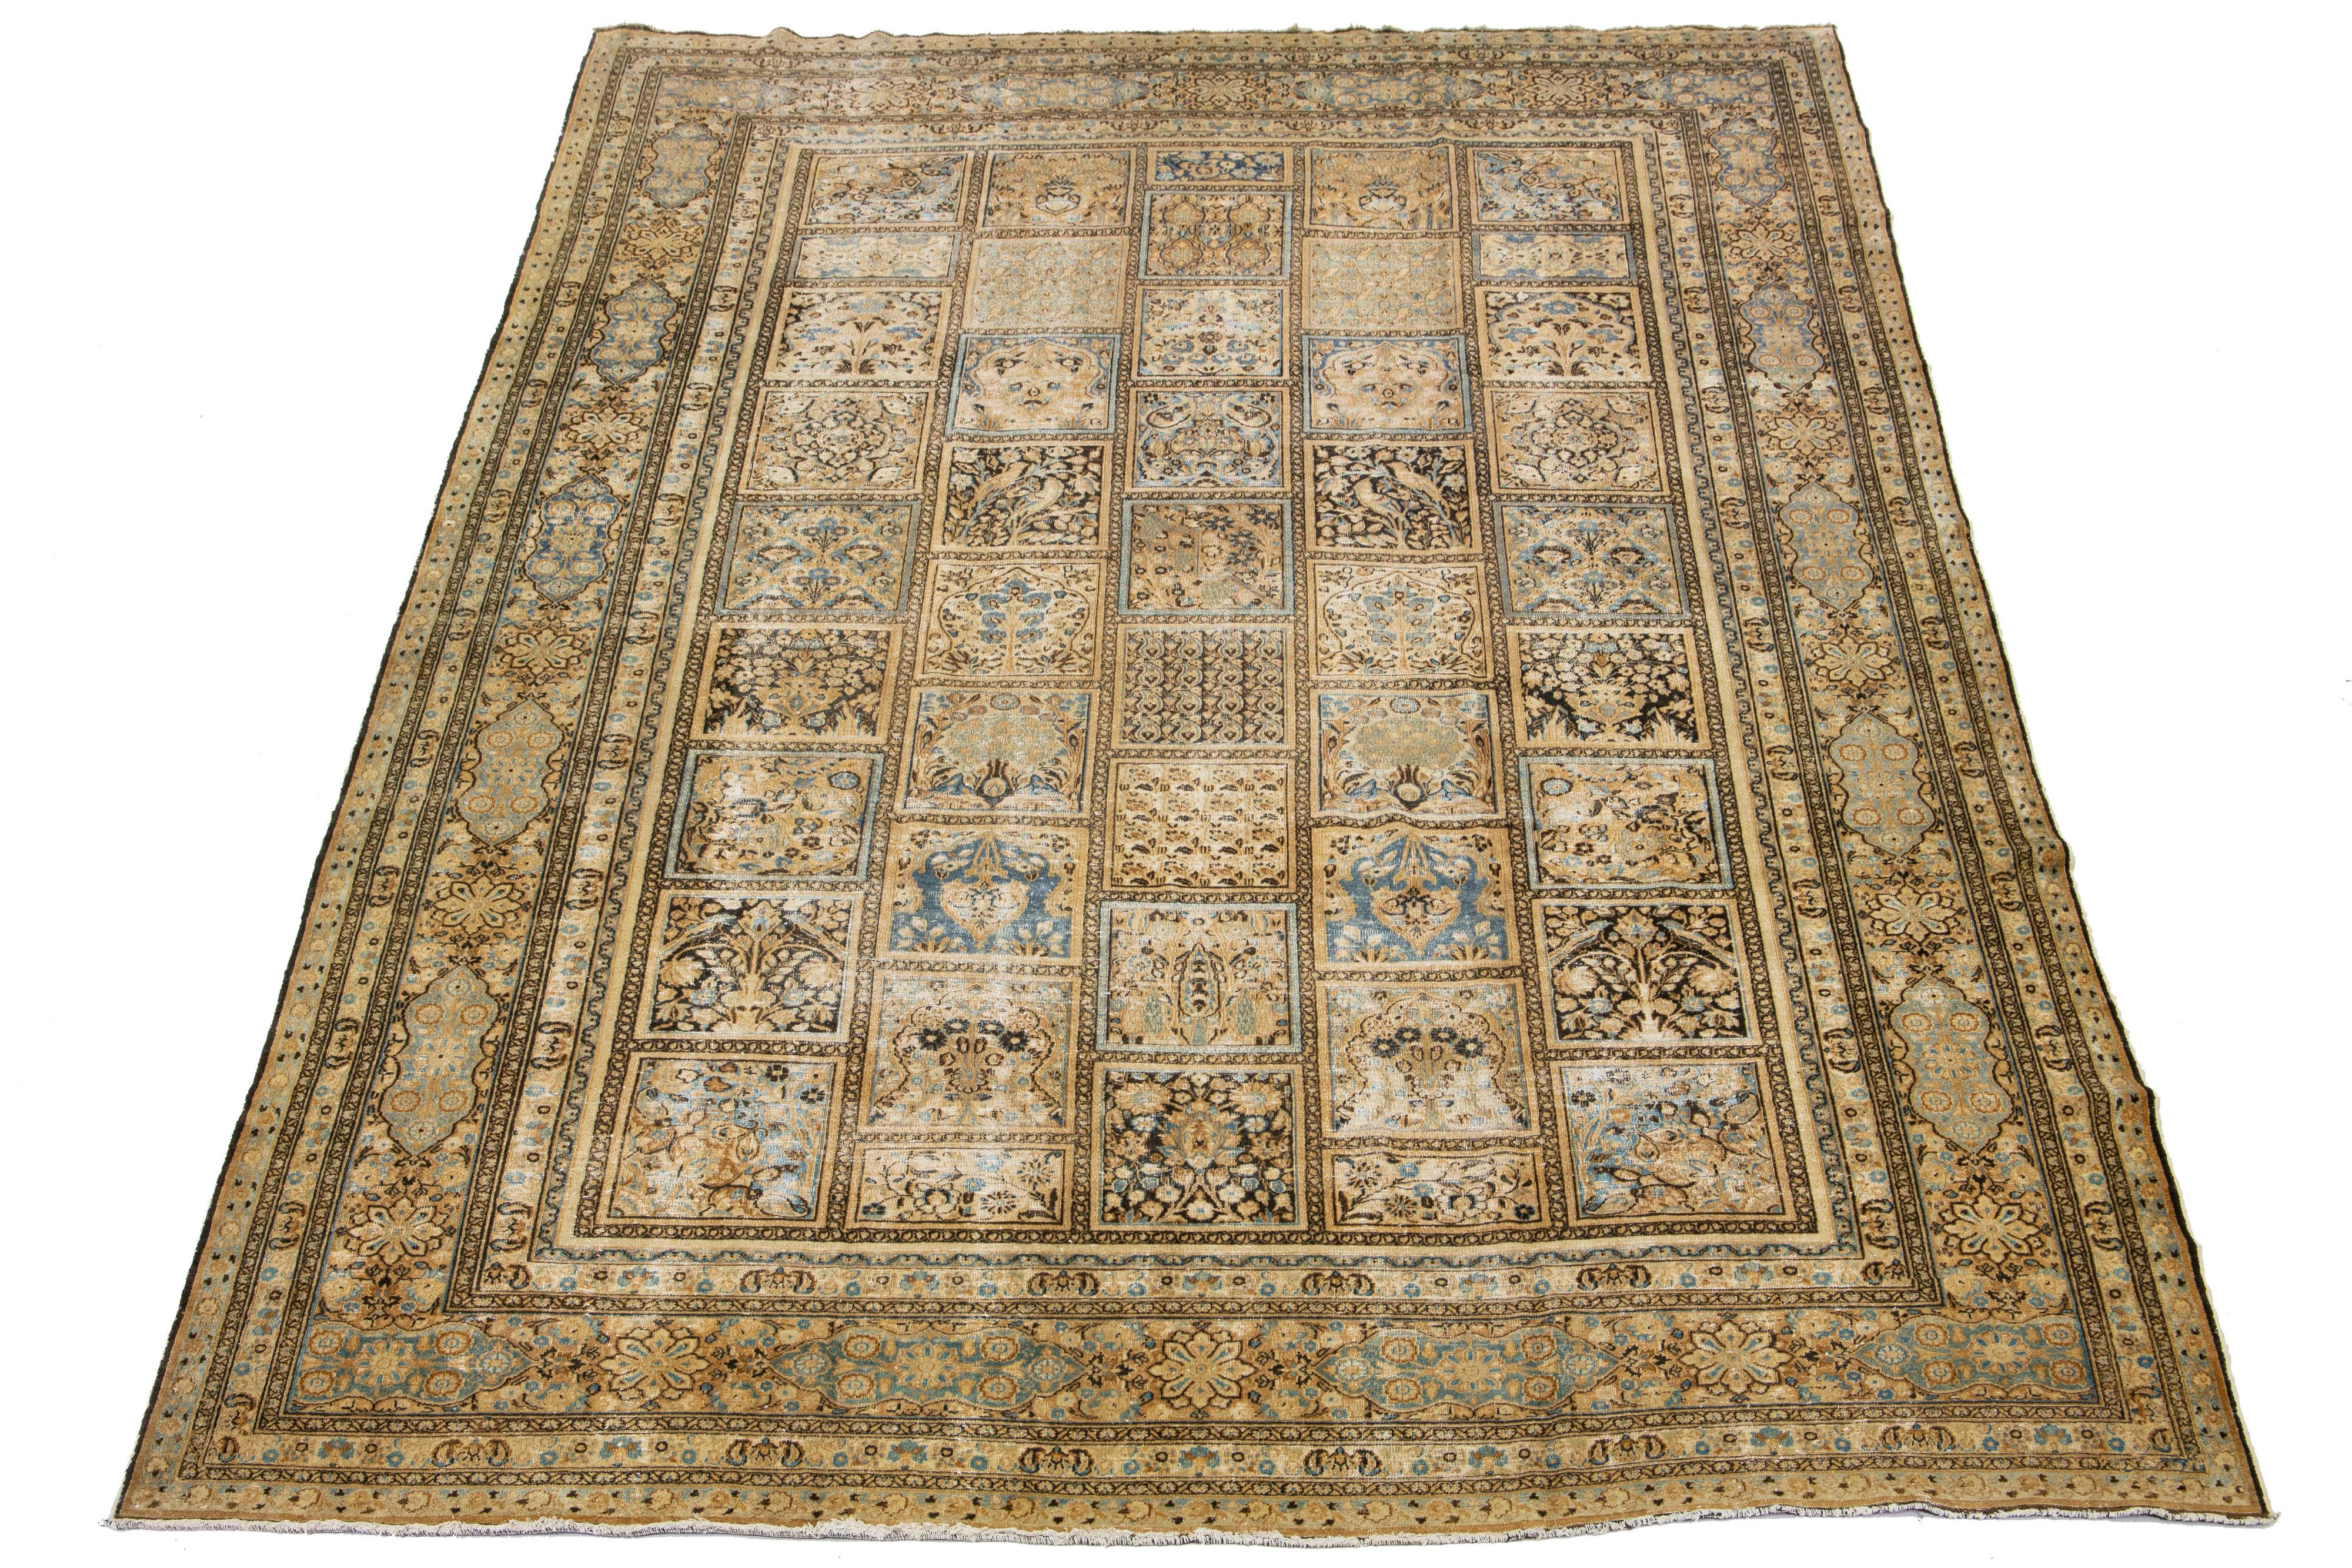 This antique Khorassan wool rug originated in the 1900s. This Persian marvel is skillfully hand-knotted, displaying a beige field with captivating allover patterns in accents of blue and brown.

This rug measures 11'4